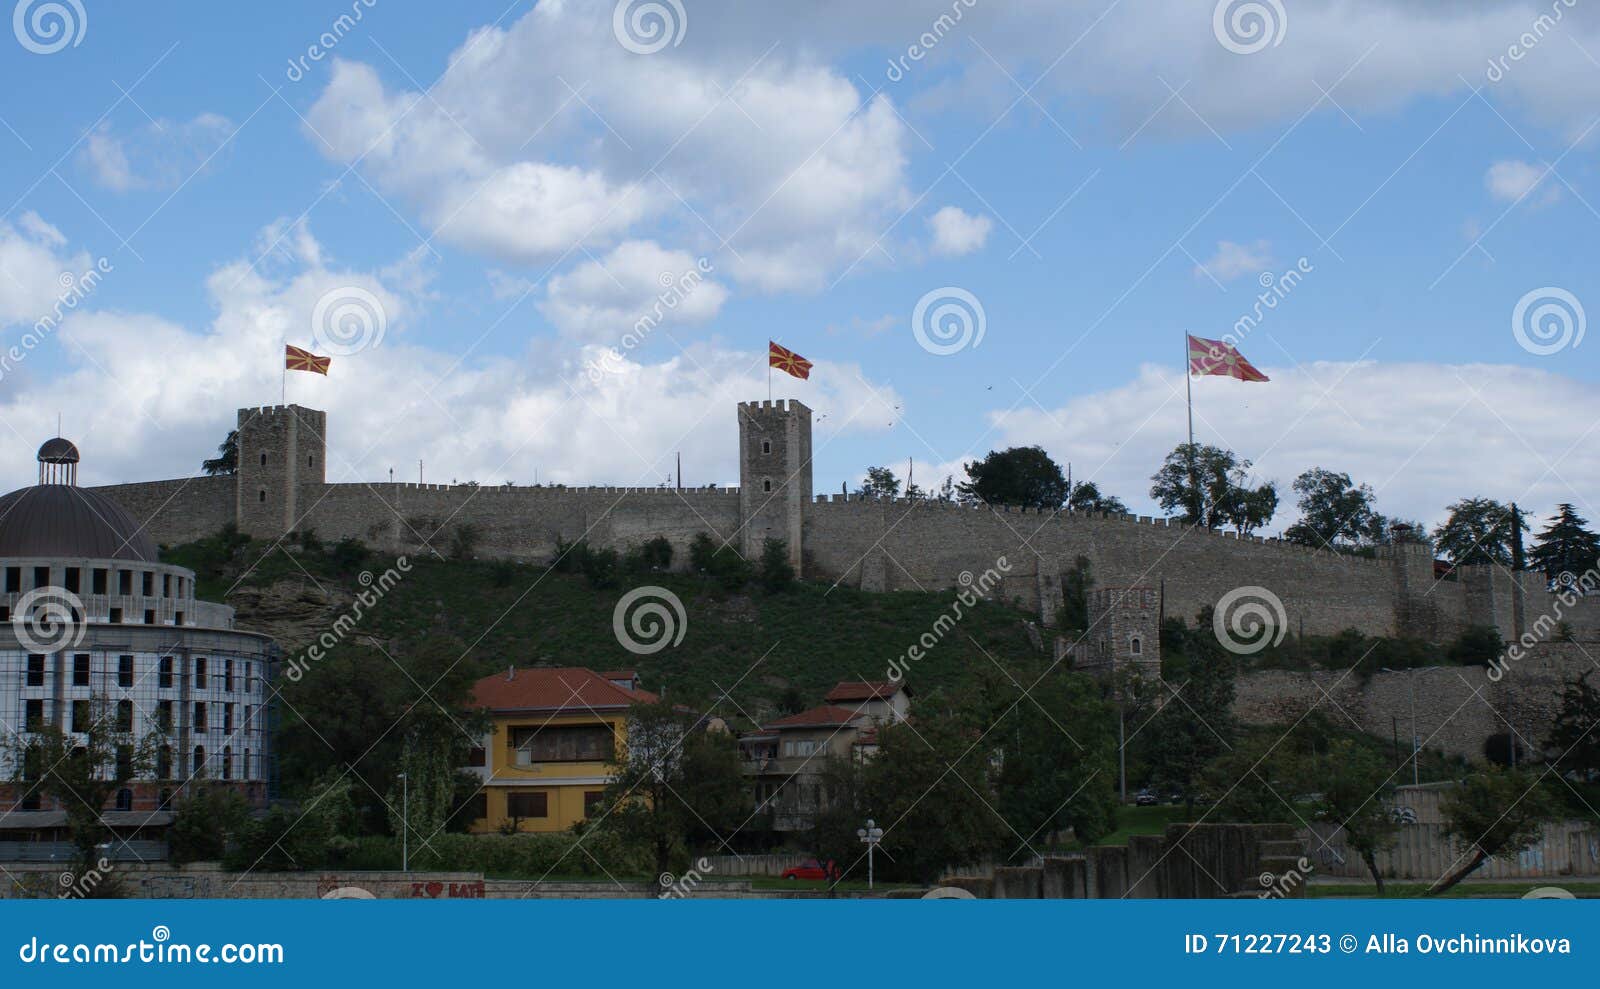 old war fort with flags and from stone